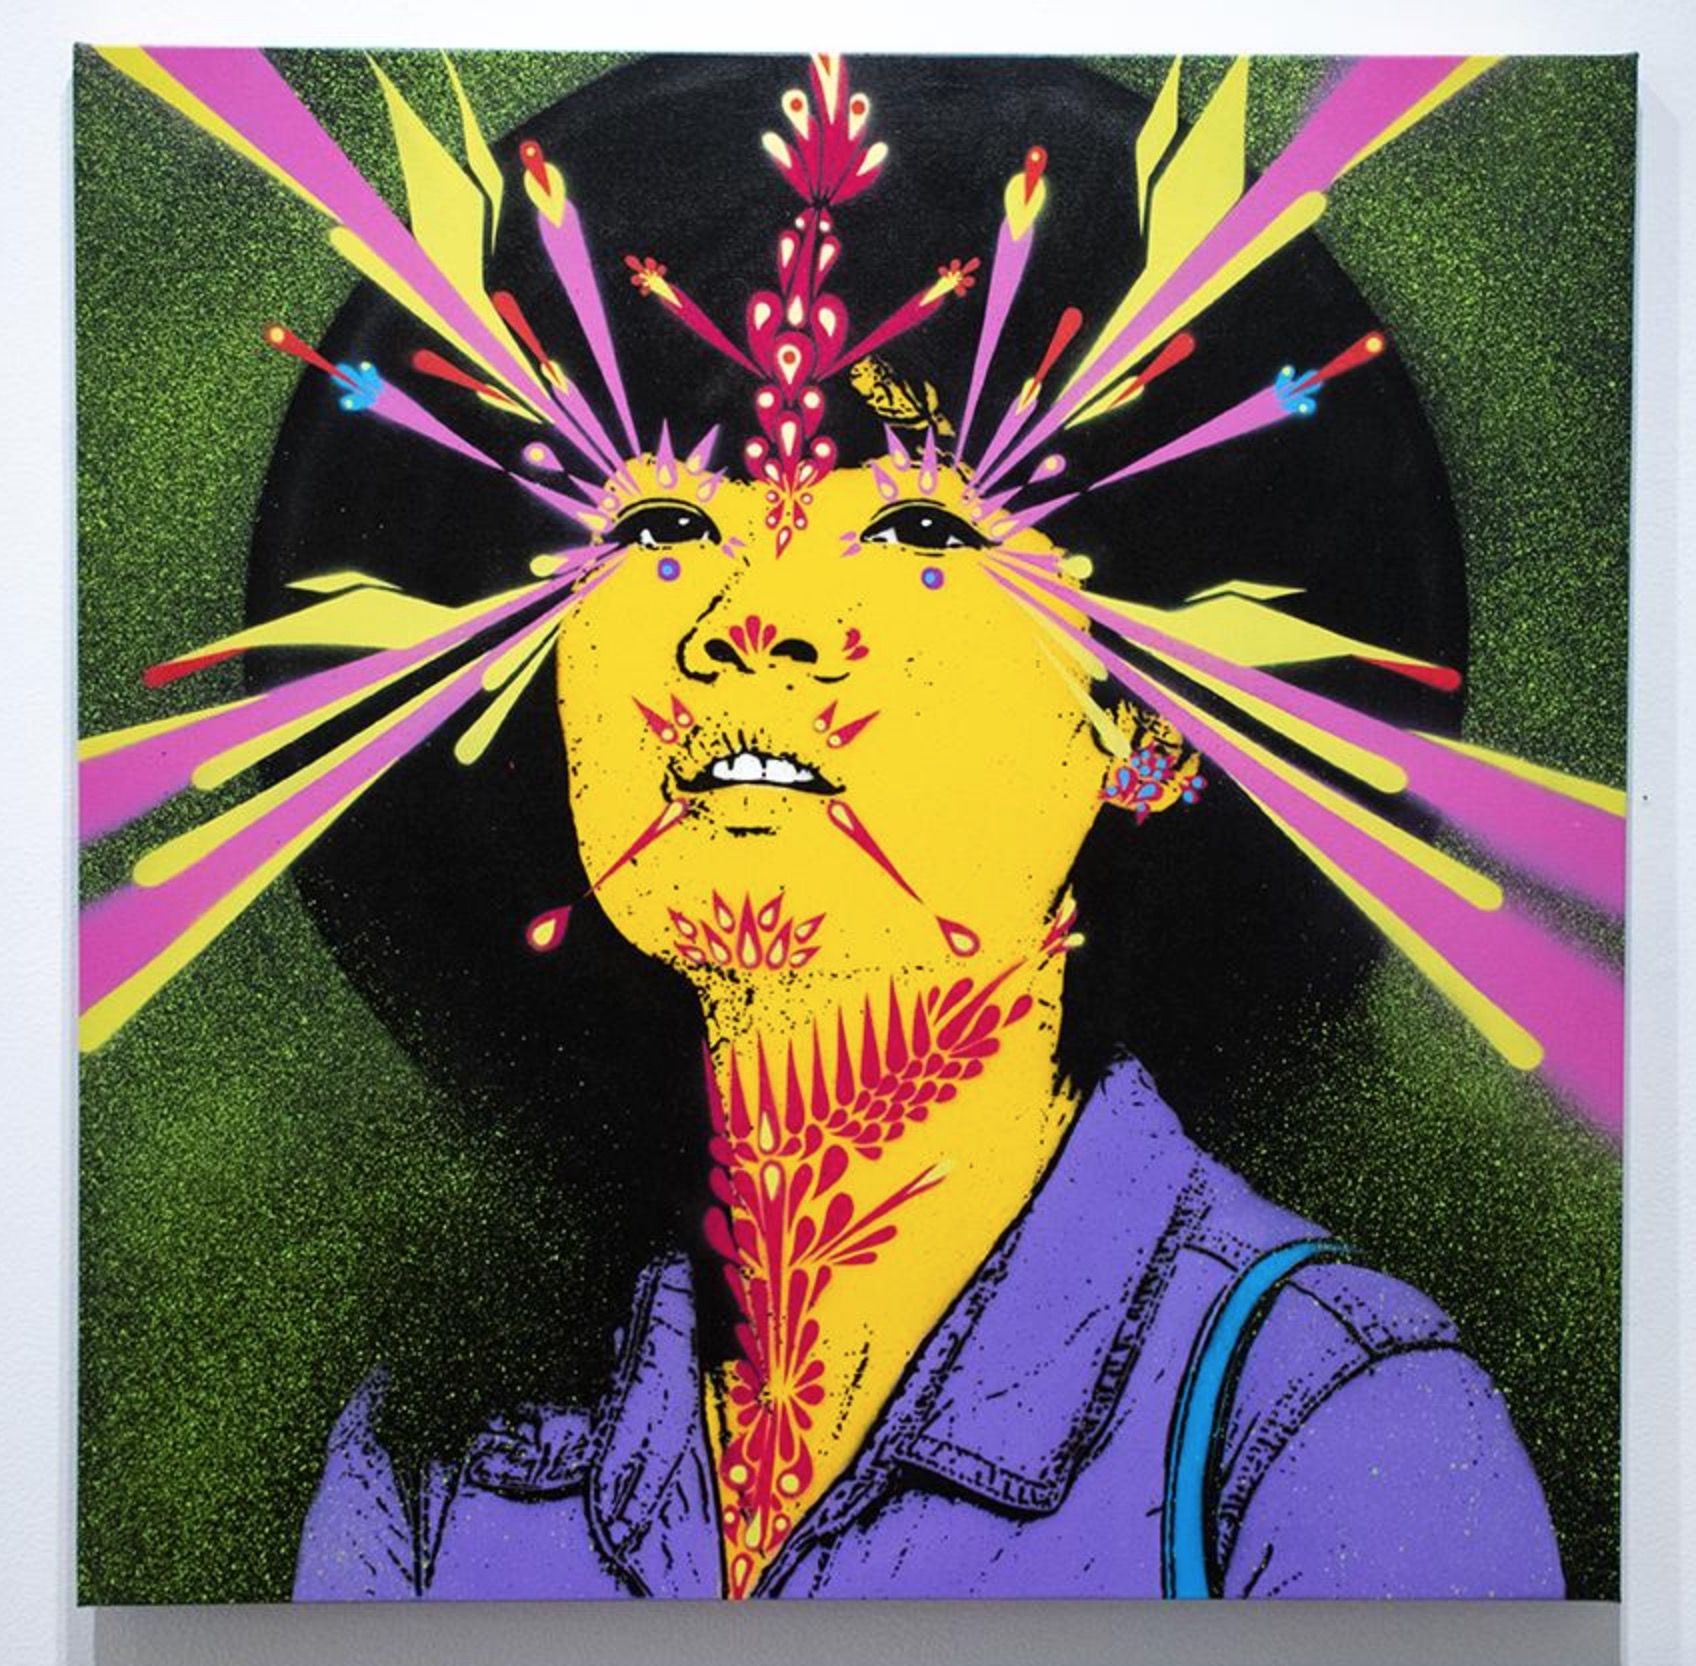 "Xi’an Woman,” 2019. Spraypaint on canvas. 30 x 30 in., 76 x 76 cm.